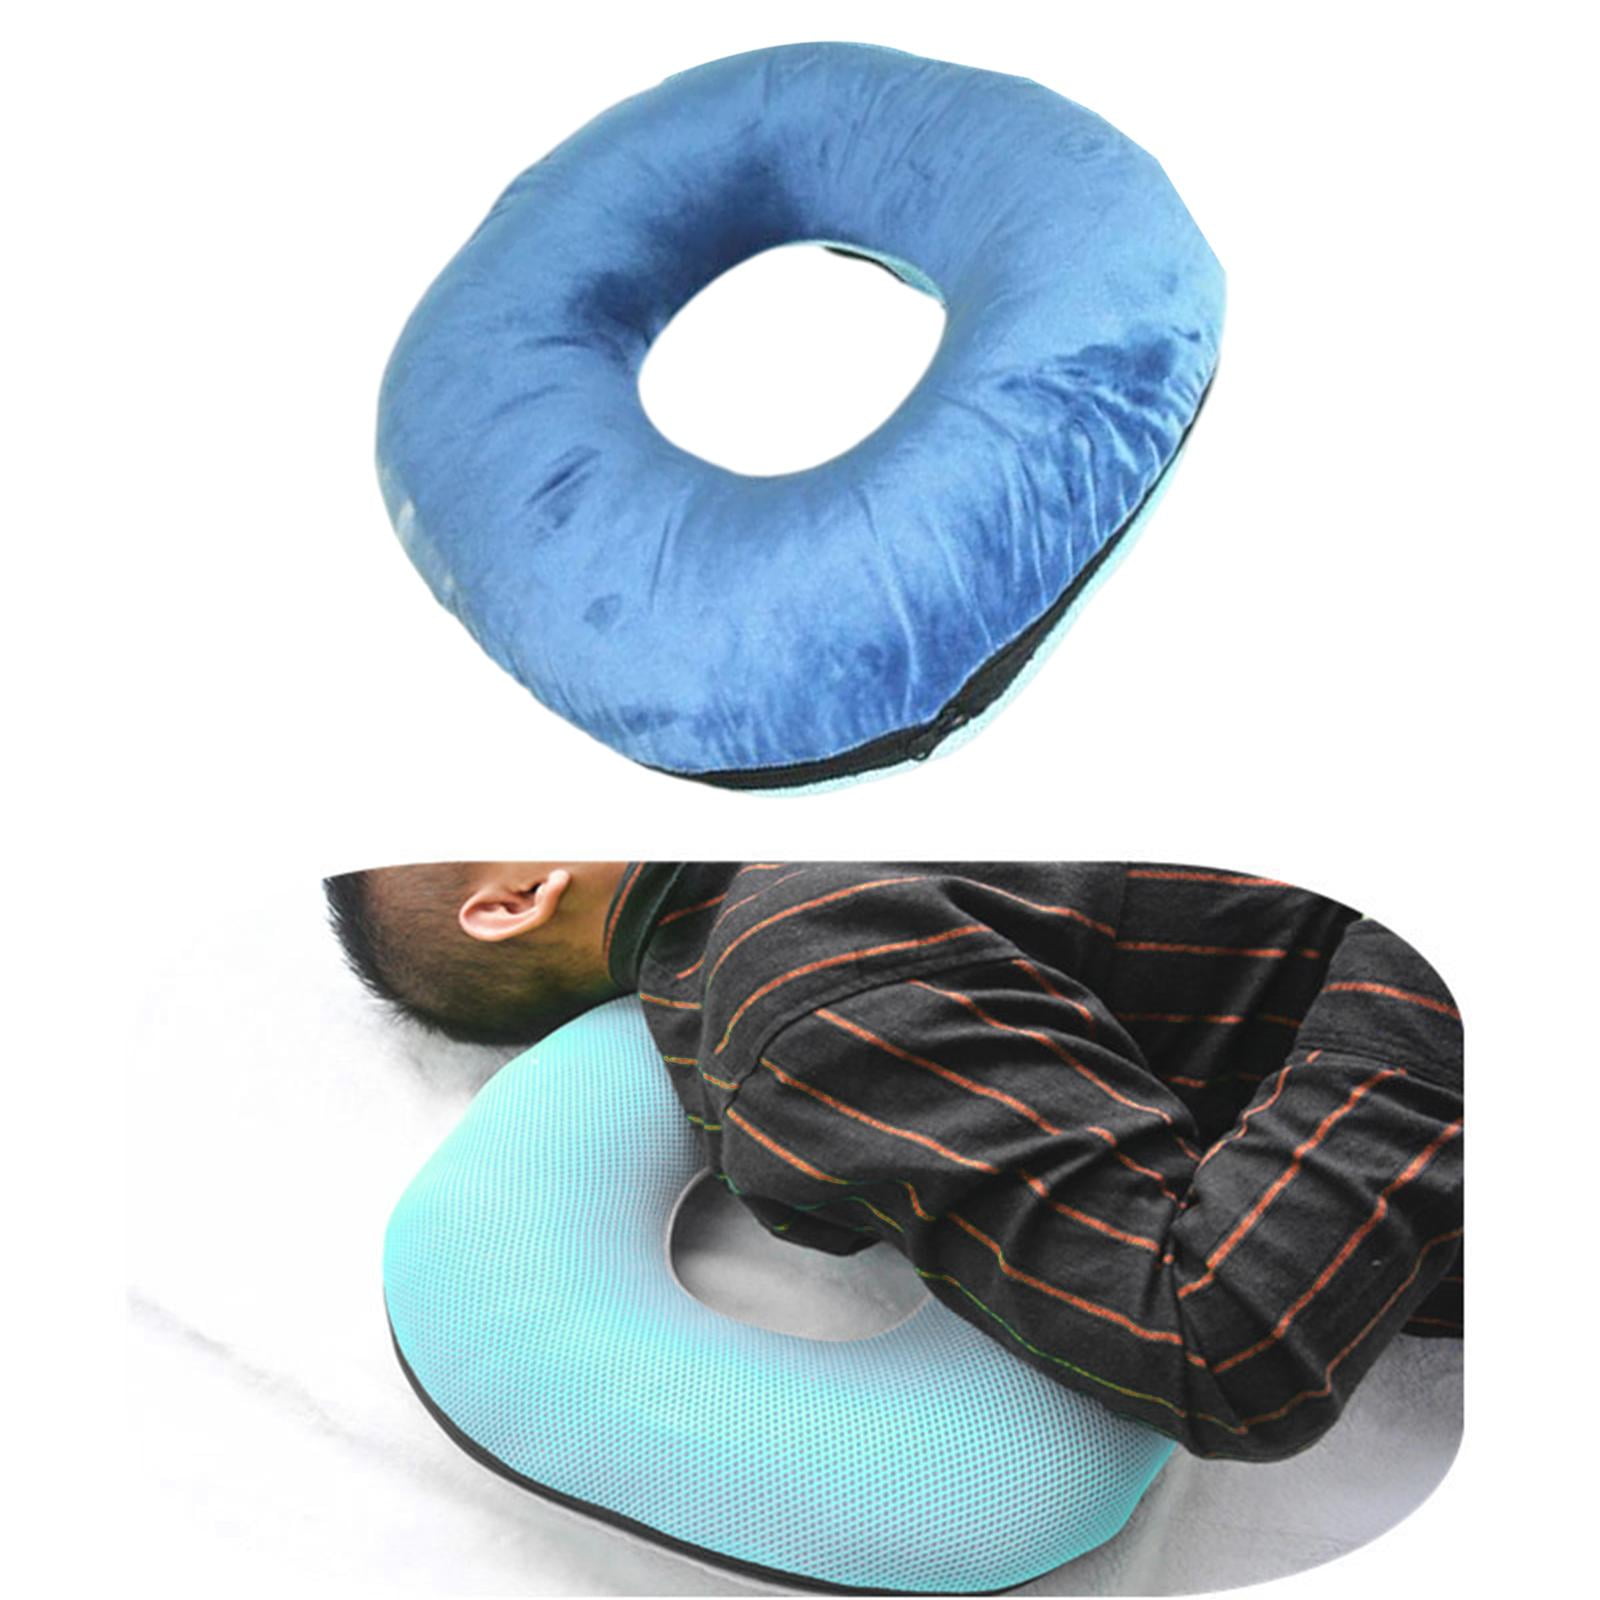 Inflatable Donut Pillow / Donut Pillow With Pump And Travel Bag - Lumbar  Support For Hemorrhoids, Pregnancy, Tailbone Pain, Home Use3